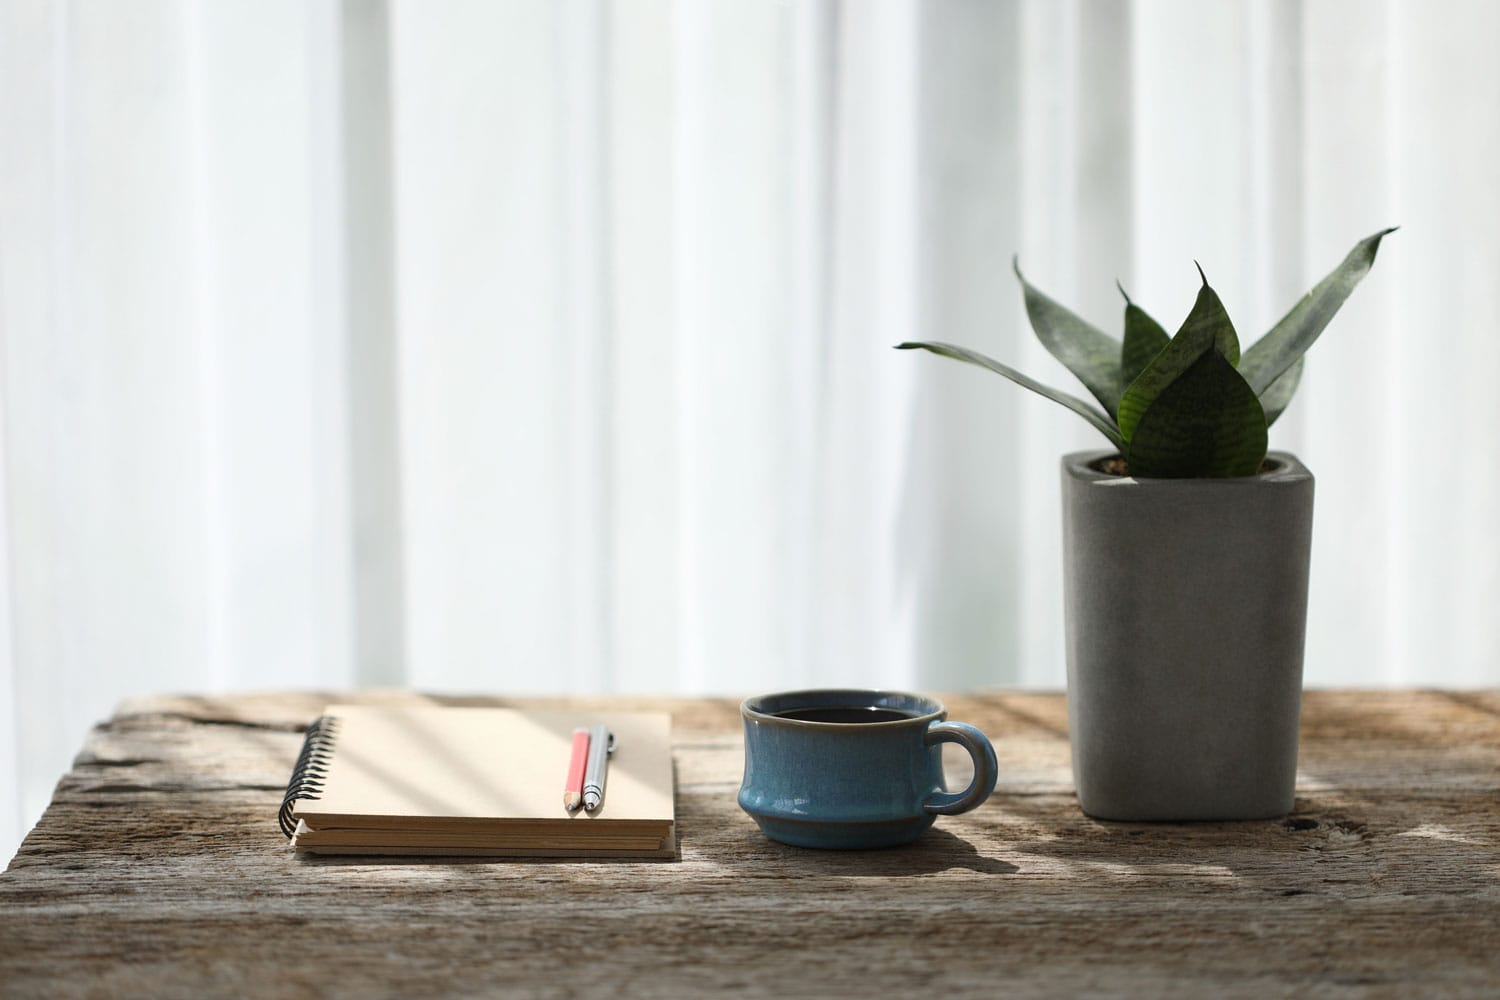 clay blue tea cup and brown notebook and pencil with snake plant on wooden table